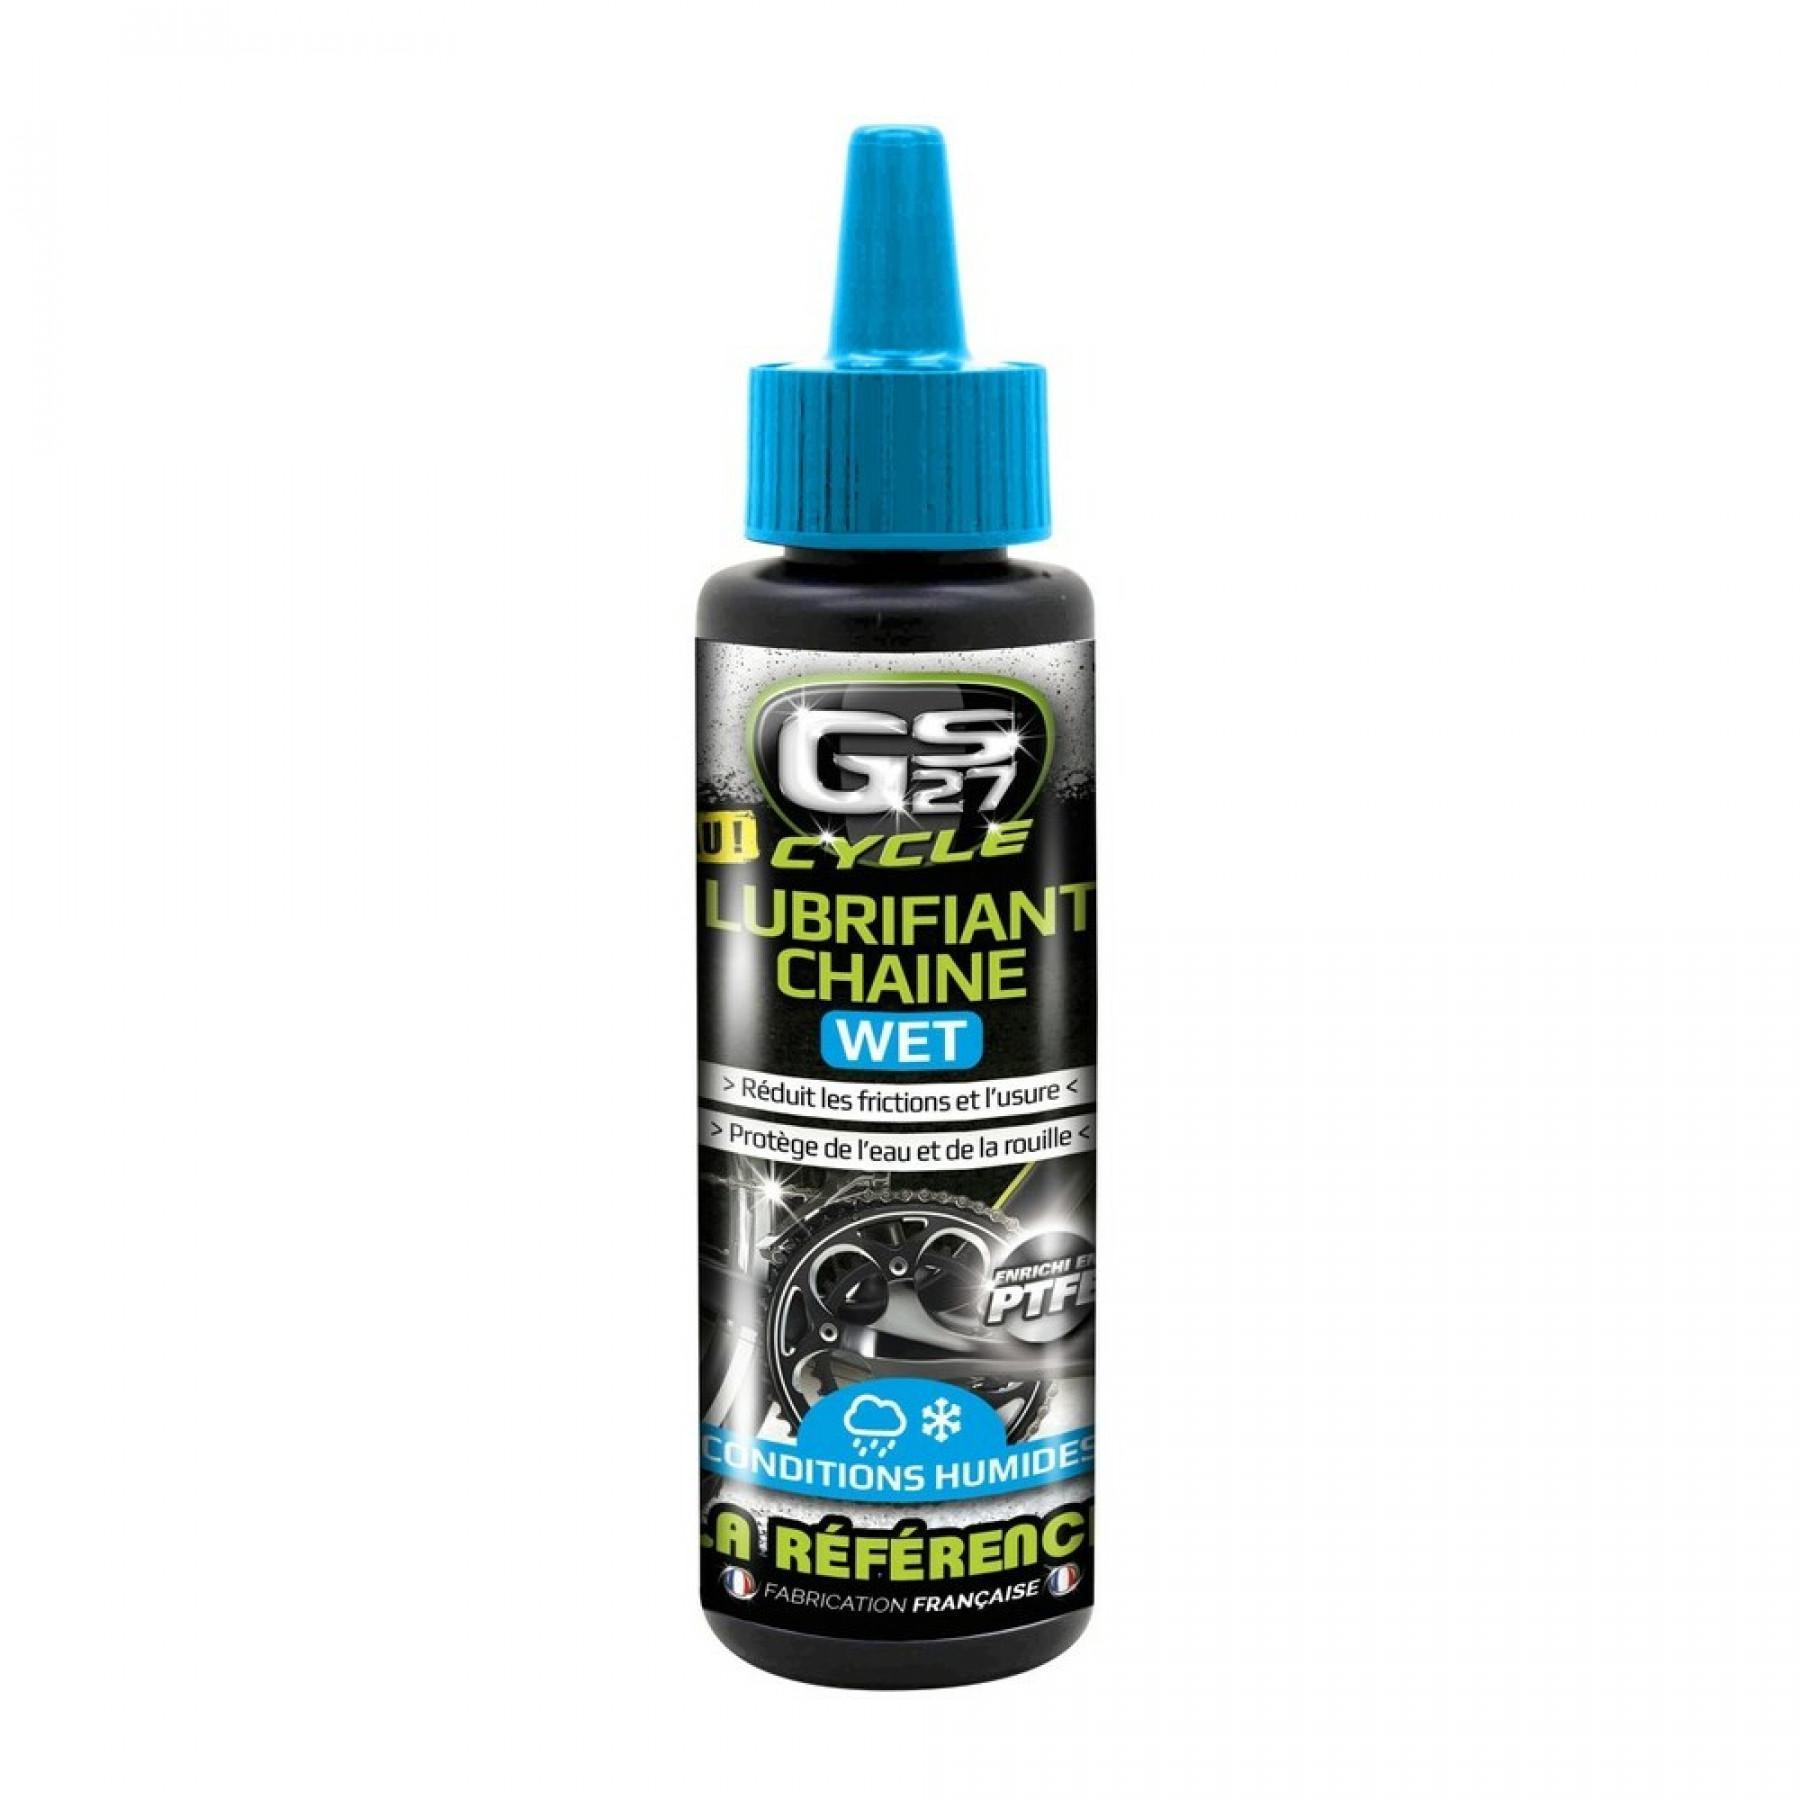 Lubricant GS27 chaine wet